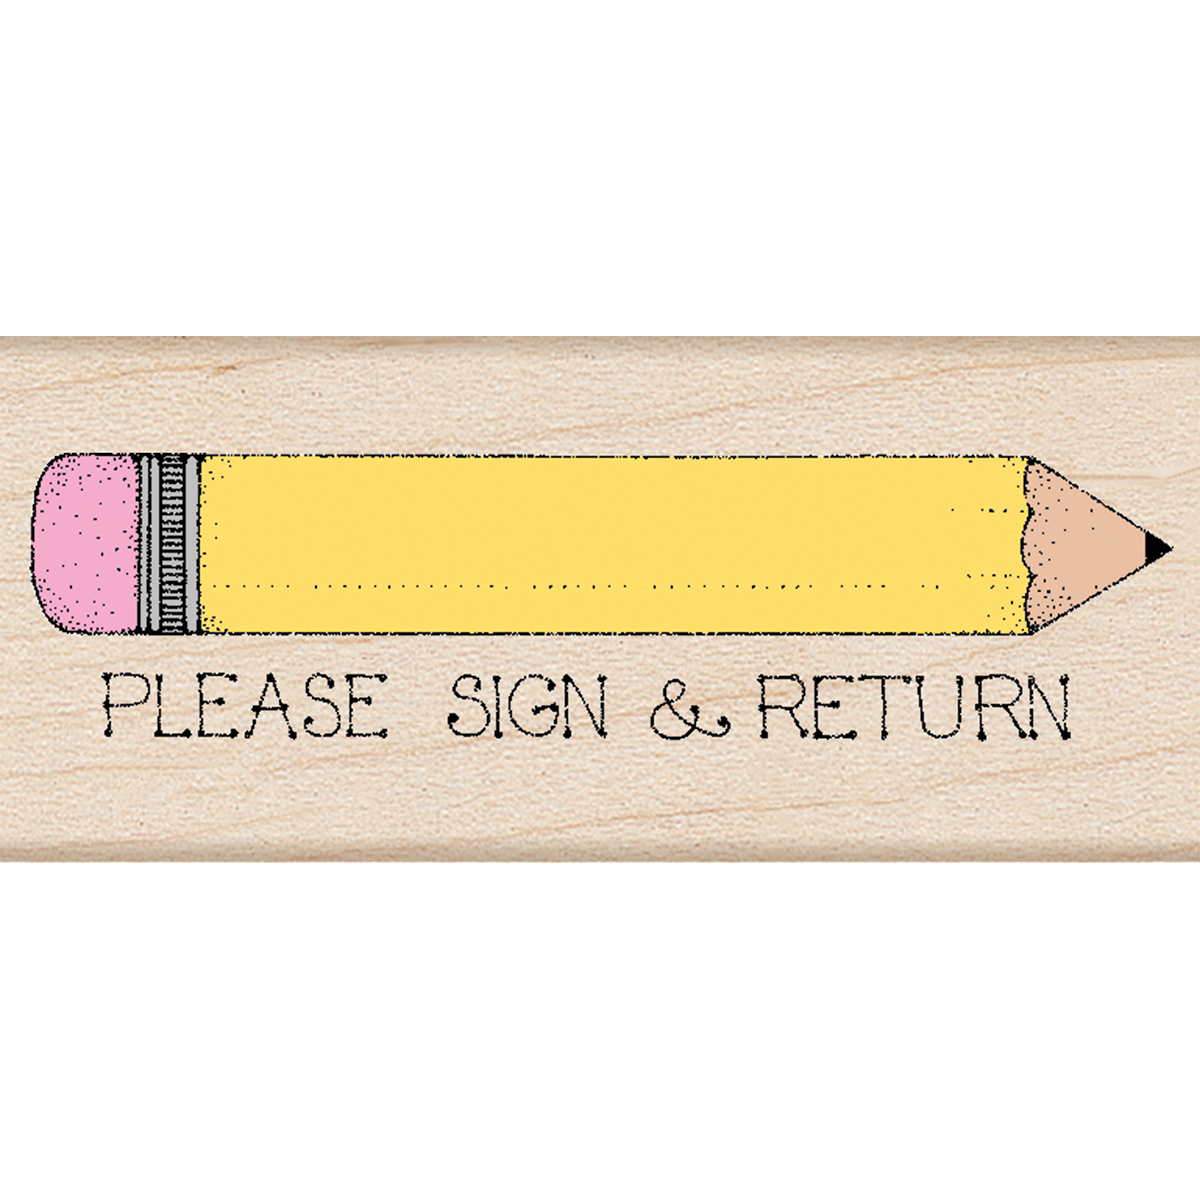 Picture of Hero Arts HA-D435 1 x 2.5 in. Hero Arts Mounted Rubber Stamp - Please Sign & Return Pencil